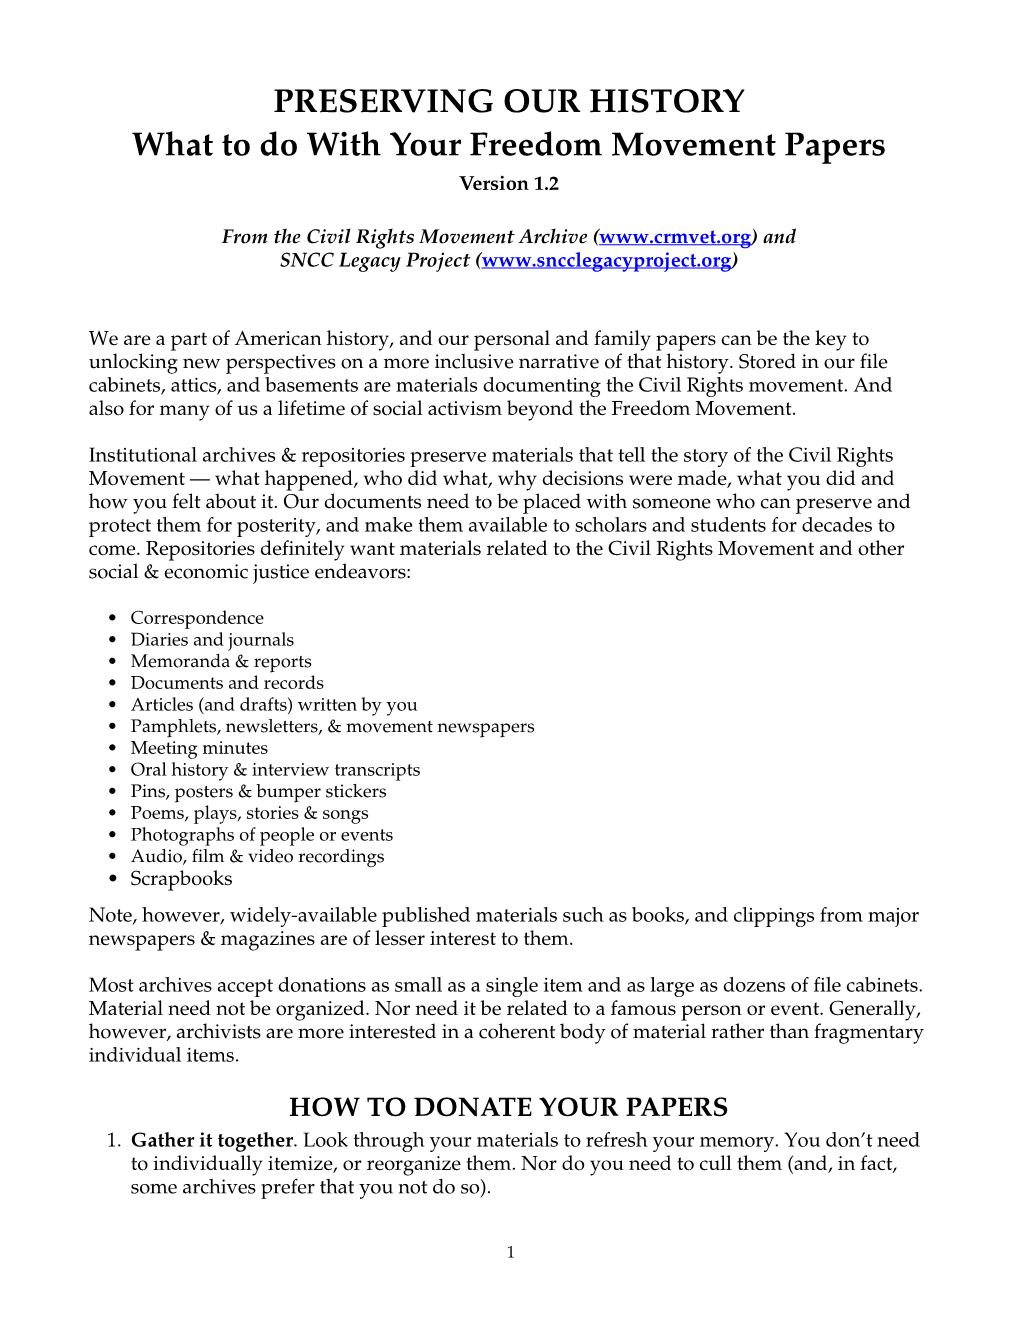 PRESERVING OUR HISTORY What to Do with Your Freedom Movement Papers Version 1.2